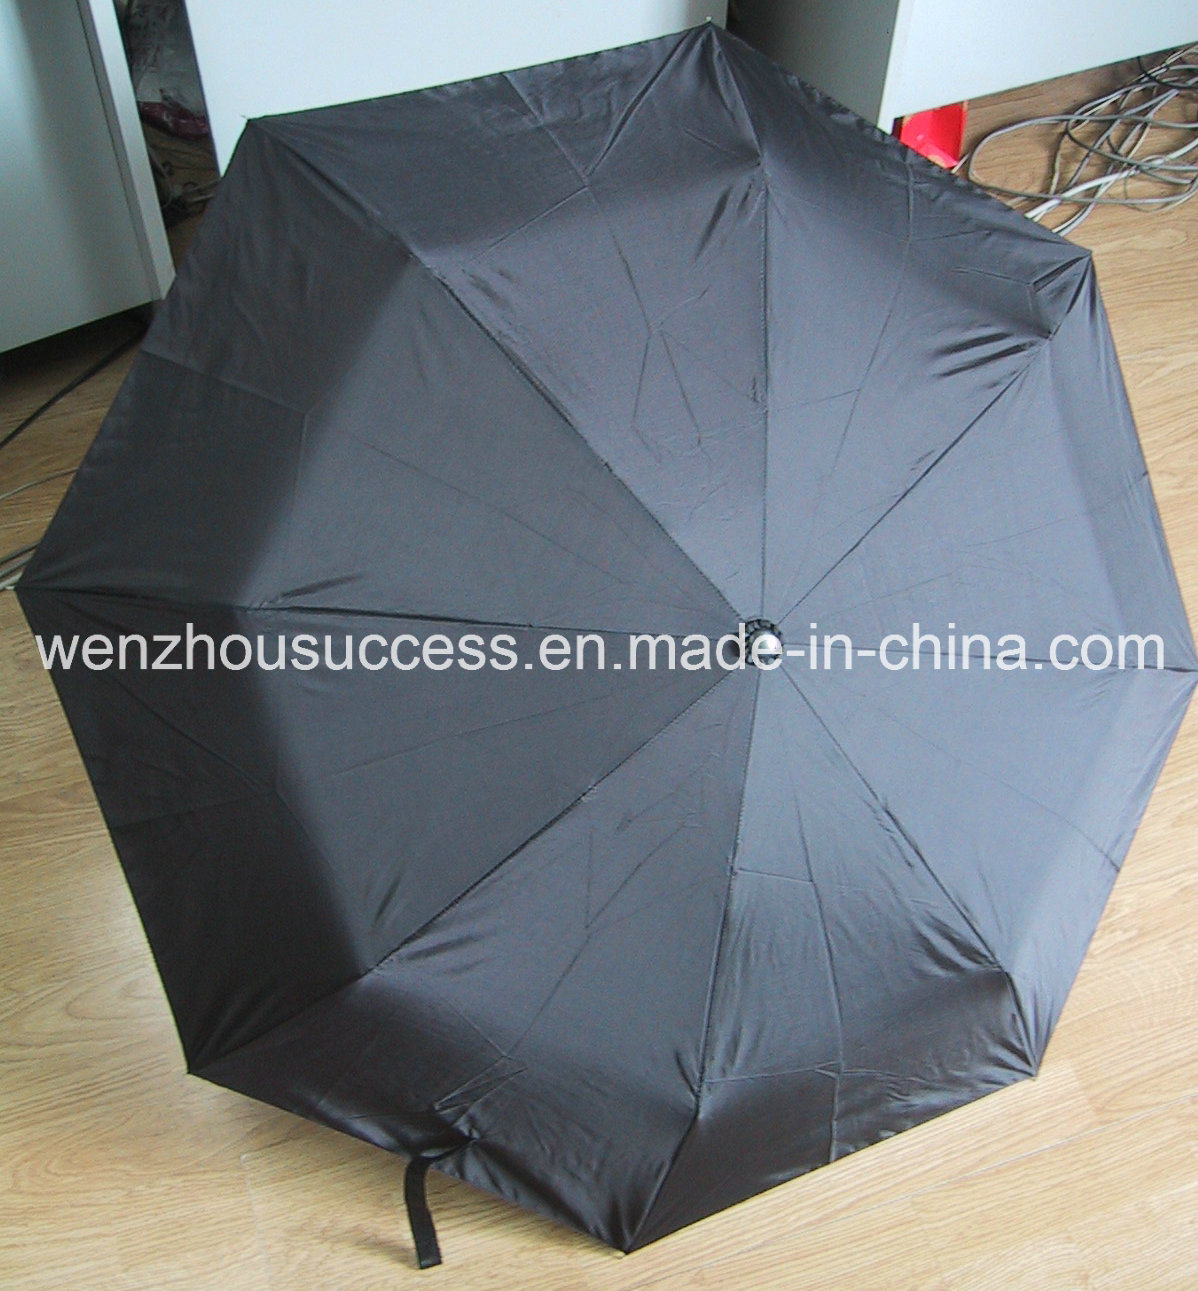 High Quality Umbrella All Kinds of Umbrella with Cheap Prices